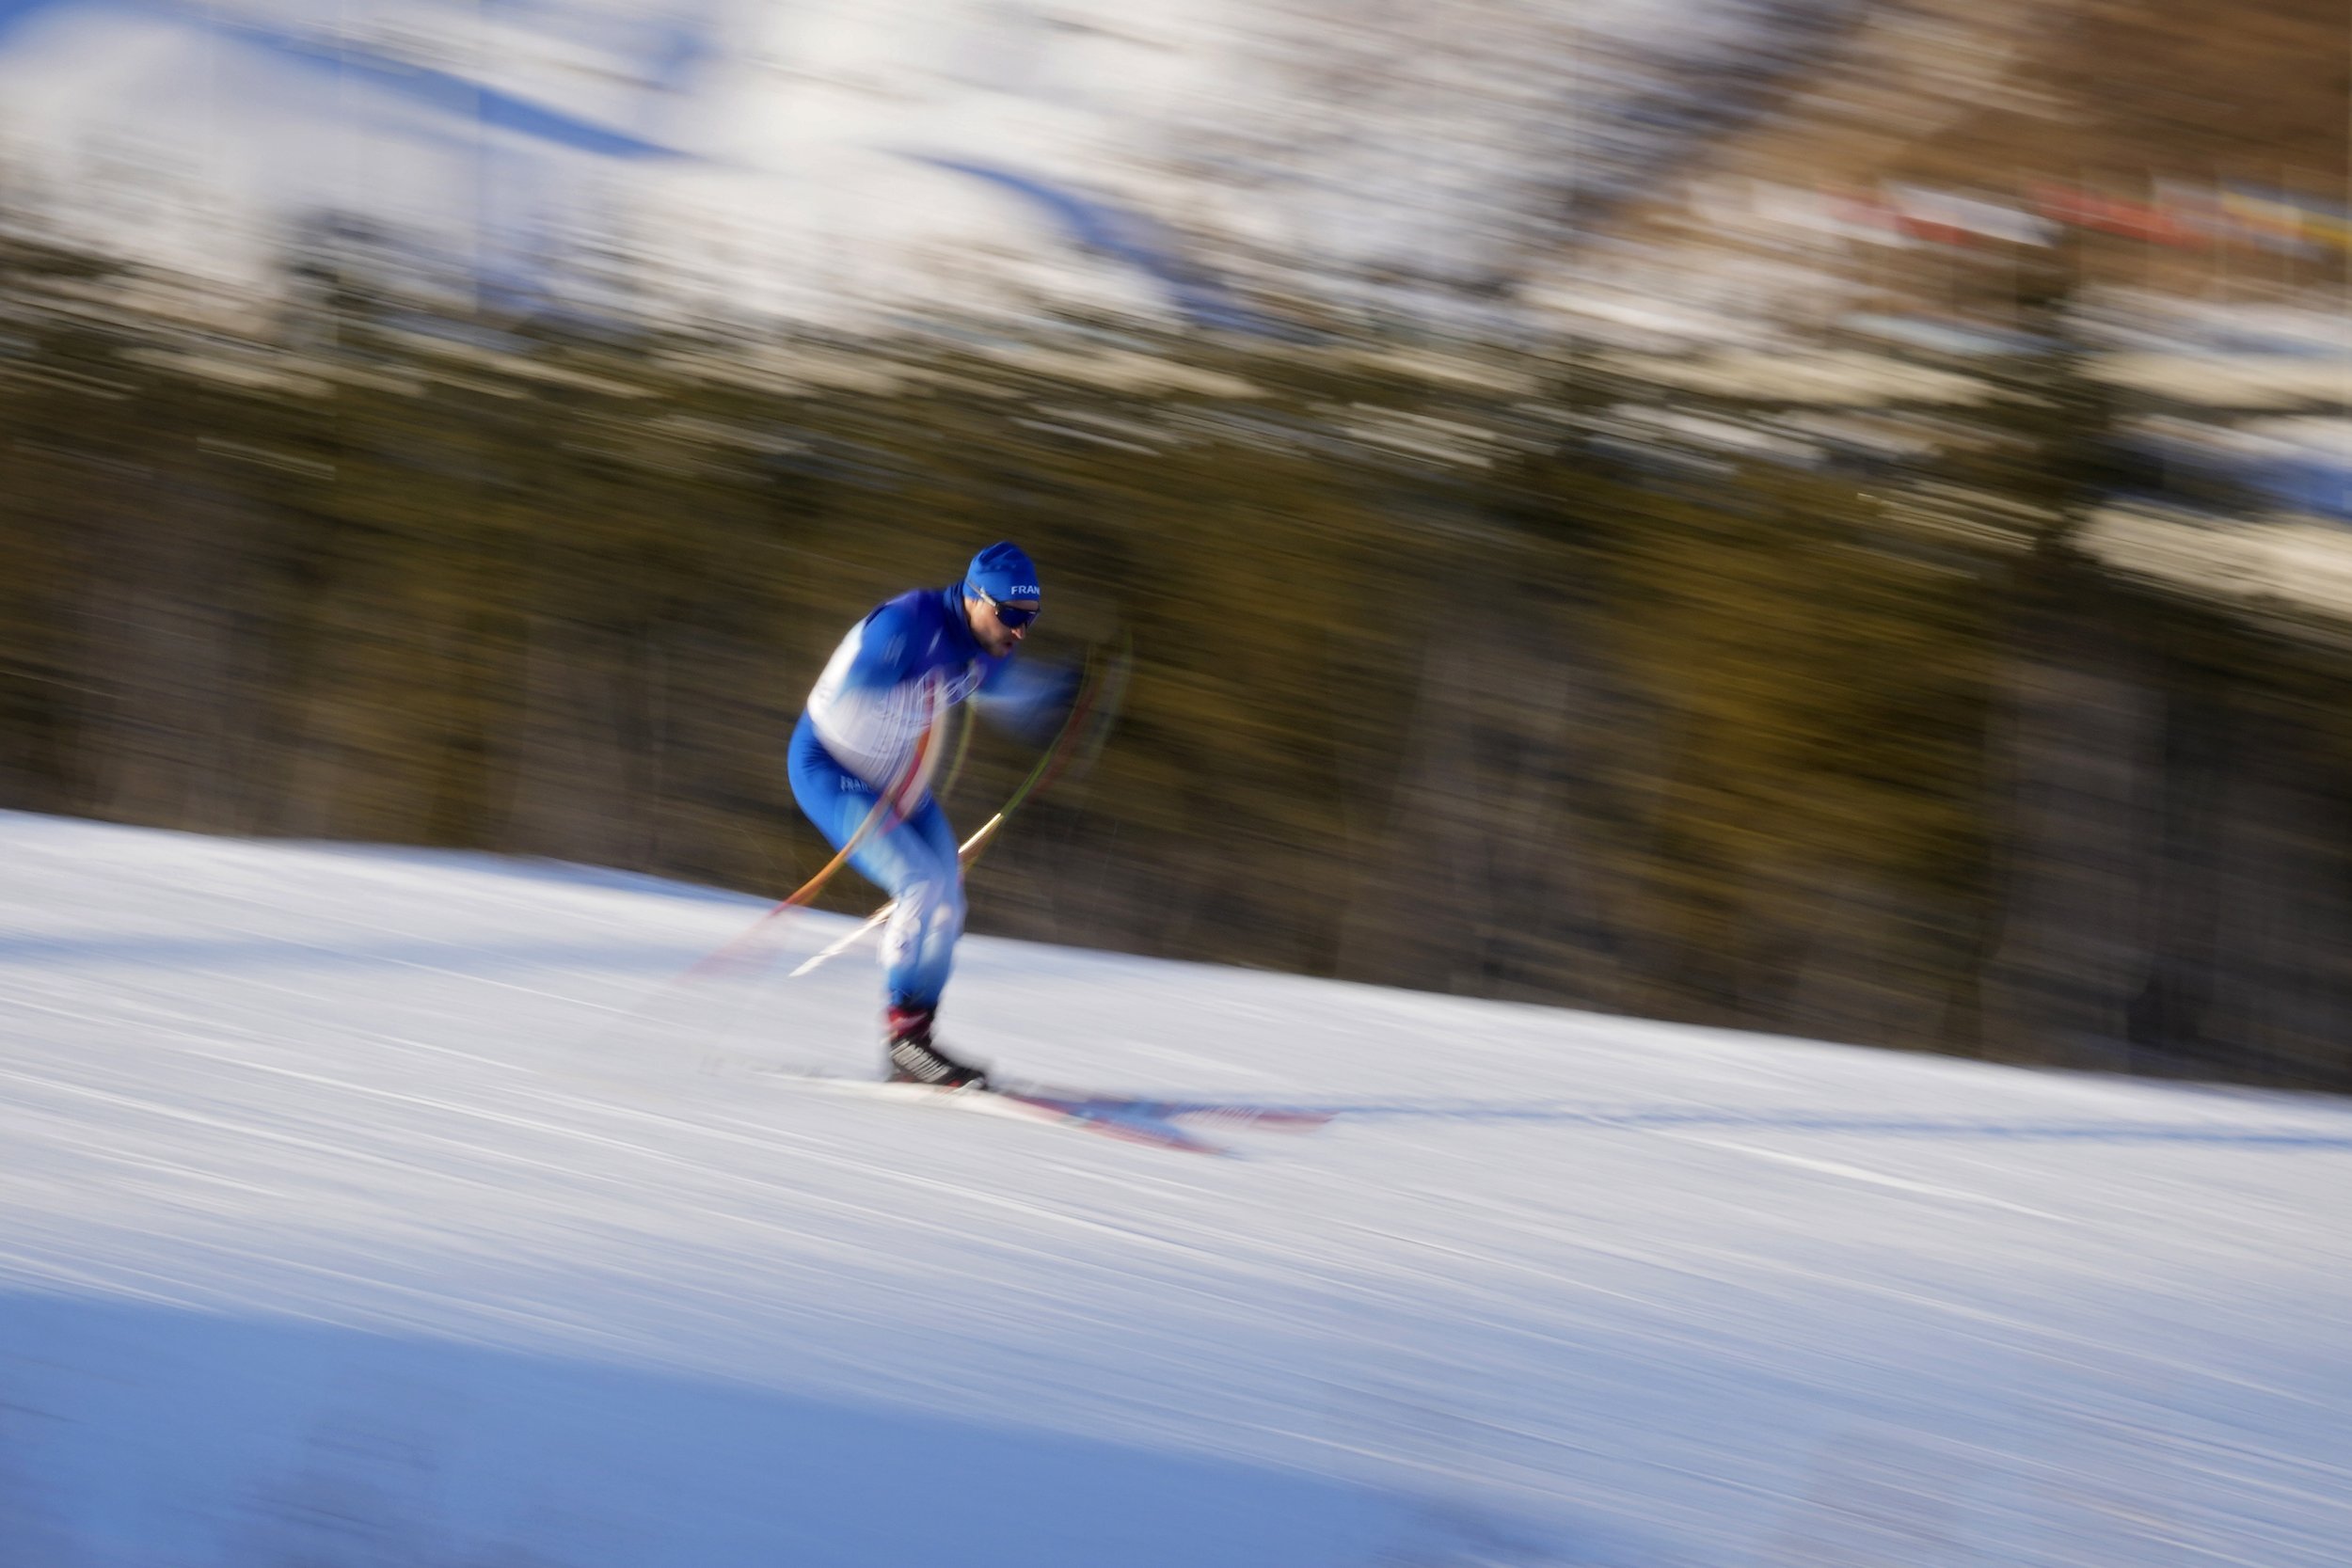  Jan Pechousek, of the Czech Republic, competes during the men's sprint free cross-country skiing competition at the 2022 Winter Olympics, Tuesday, Feb. 8, 2022, in Zhangjiakou, China. (AP Photo/Aaron Favila) 